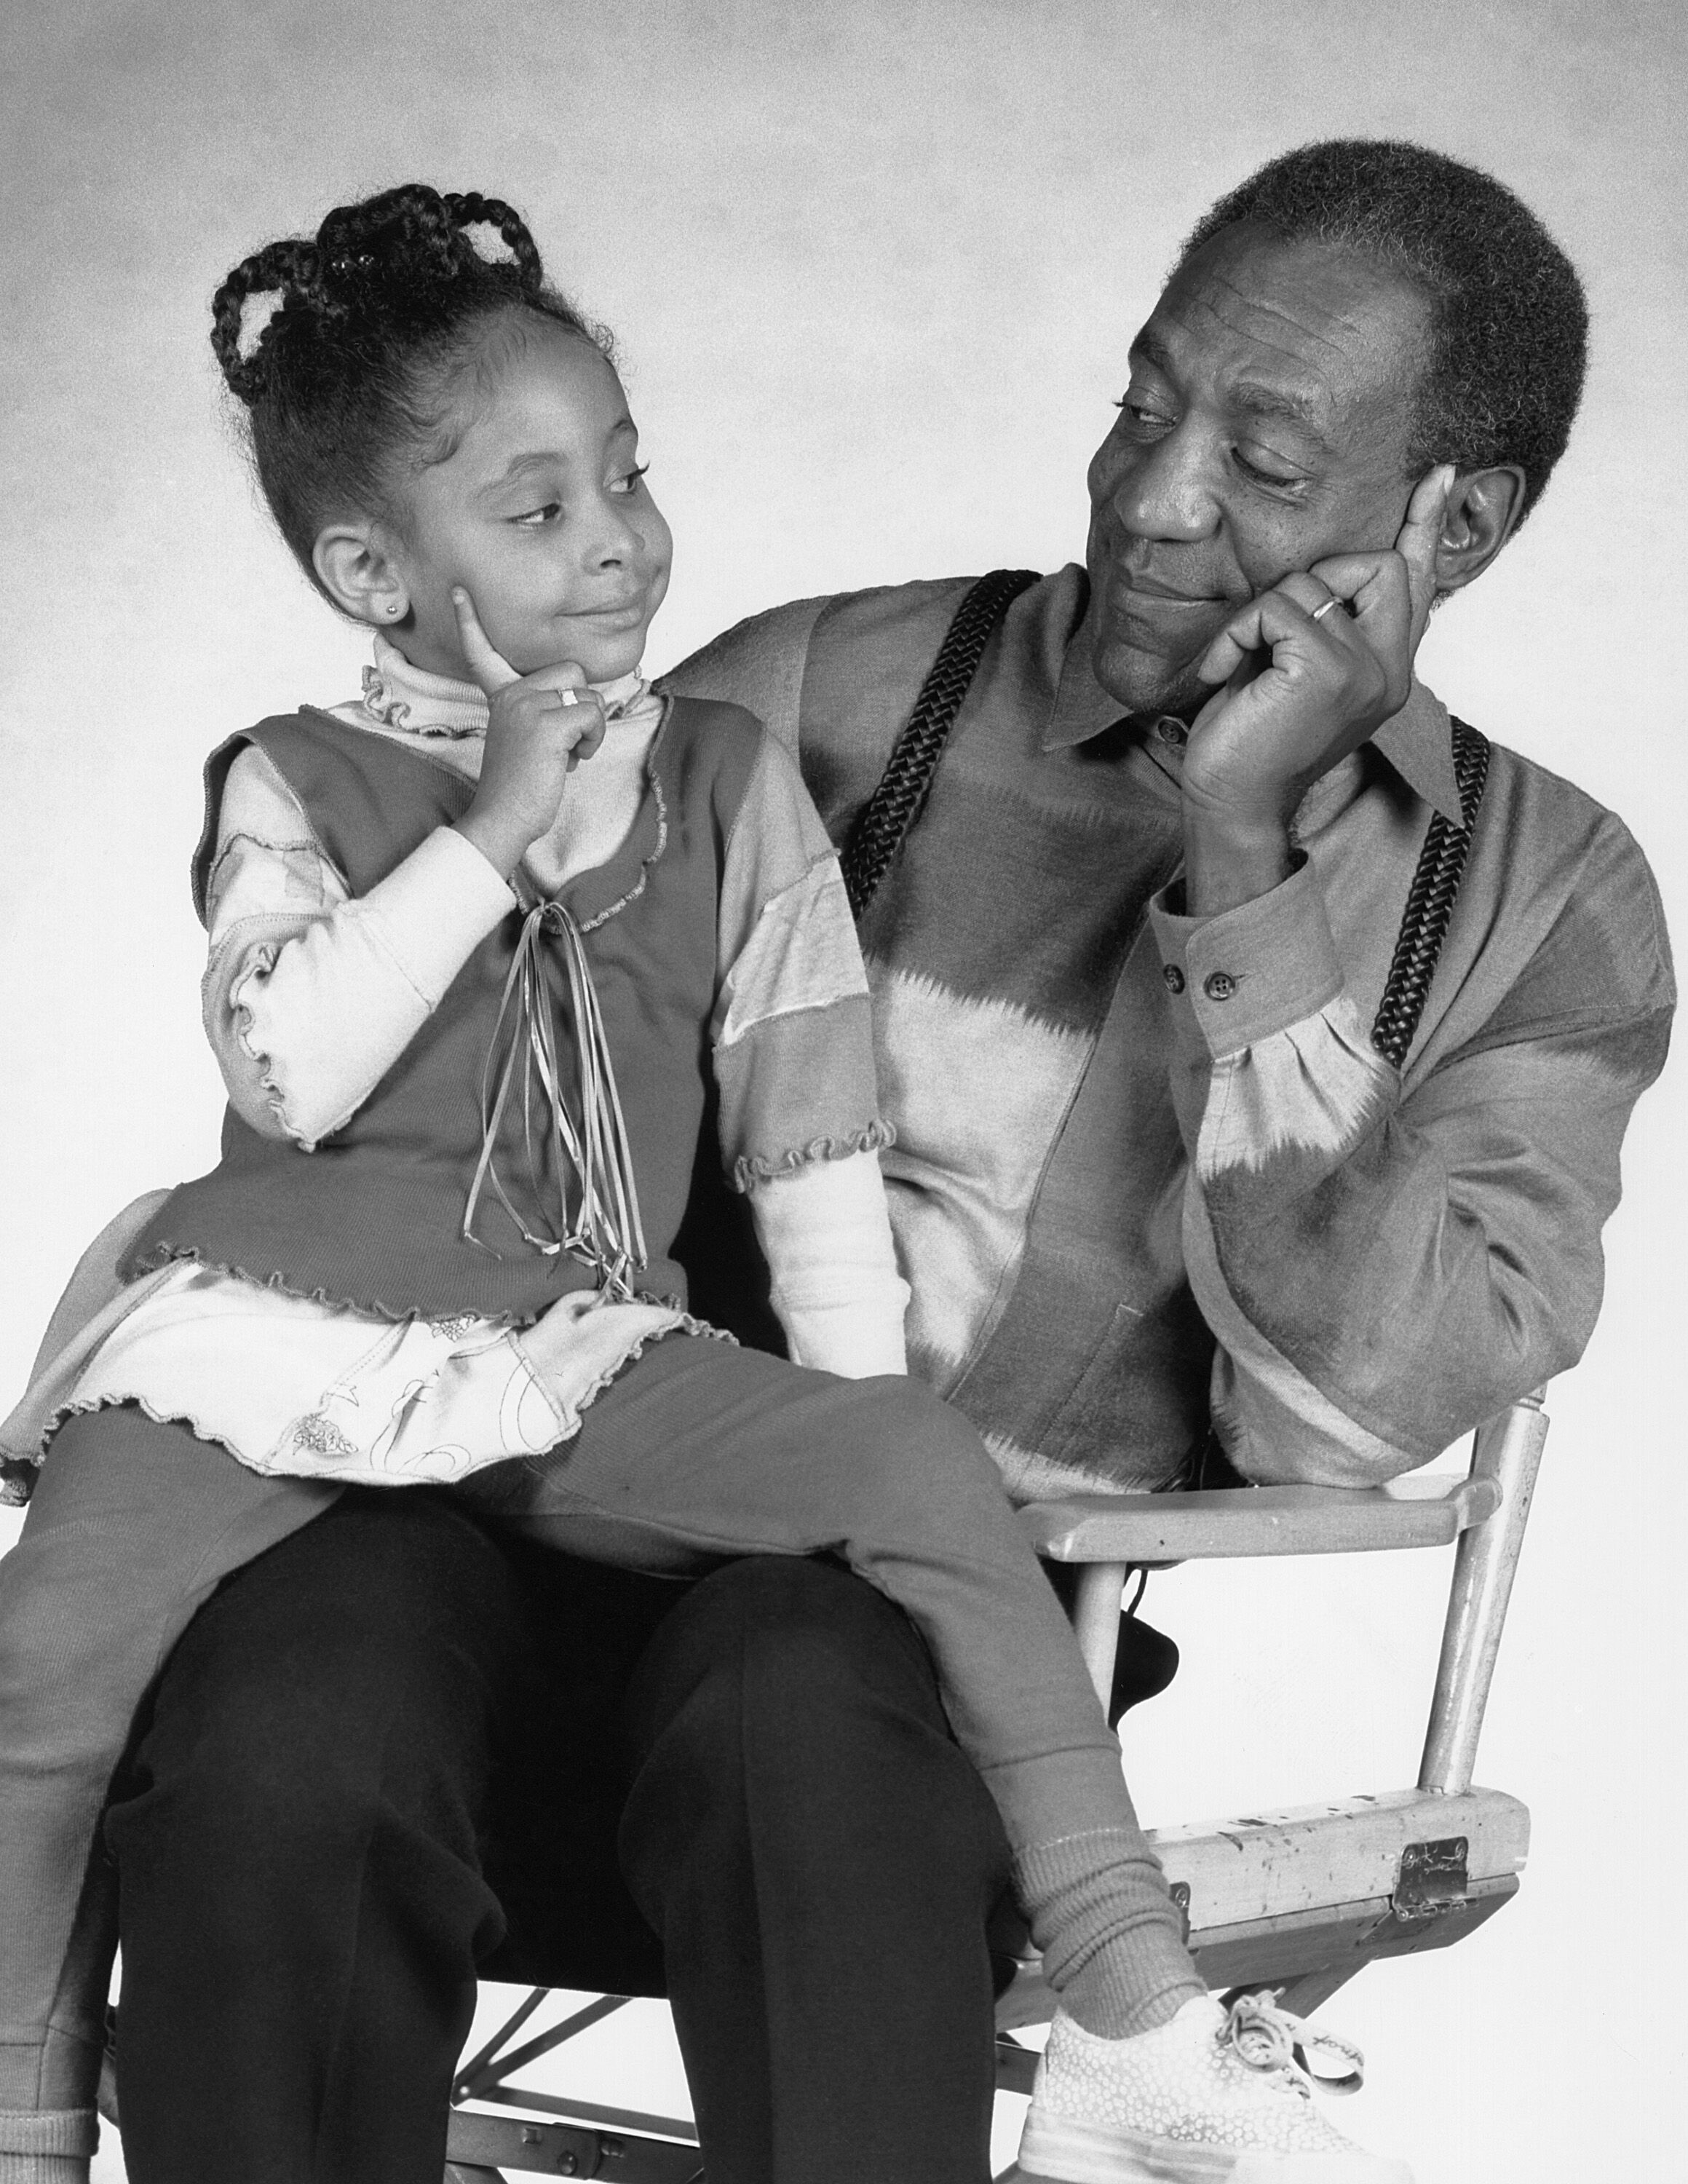 Raven-Symoné Pearman as Olivia Kendall, Bill Cosby as Dr. Heathcliff 'Cliff' Huxtable. | Source: Getty Images